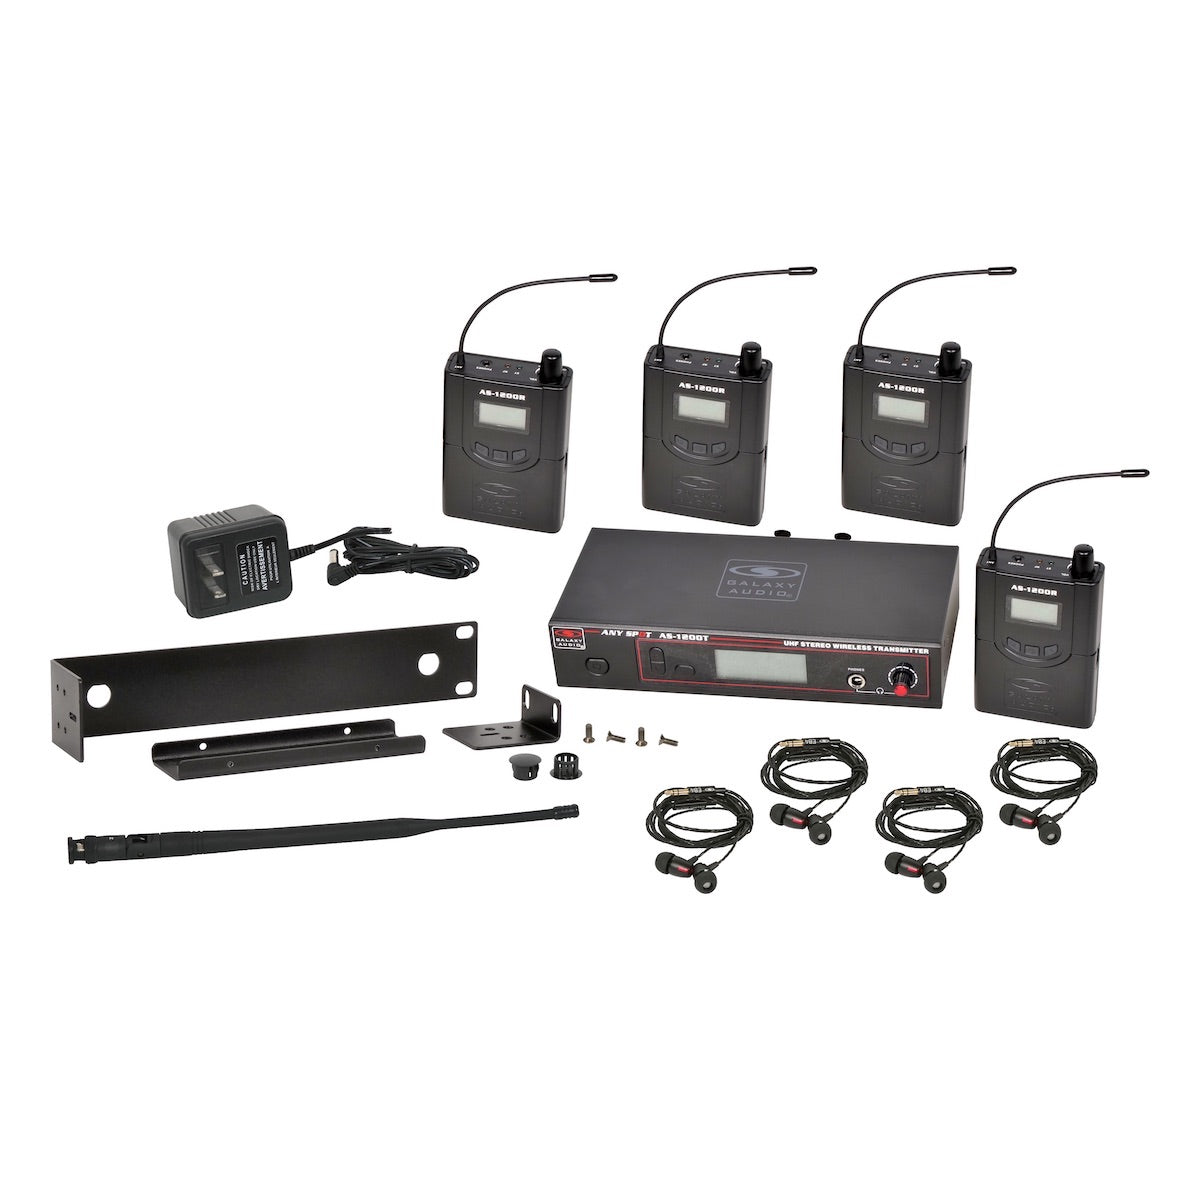 In-ear monitor system 8 Bodypack with Transmitter, Dual Wireless  Microphones